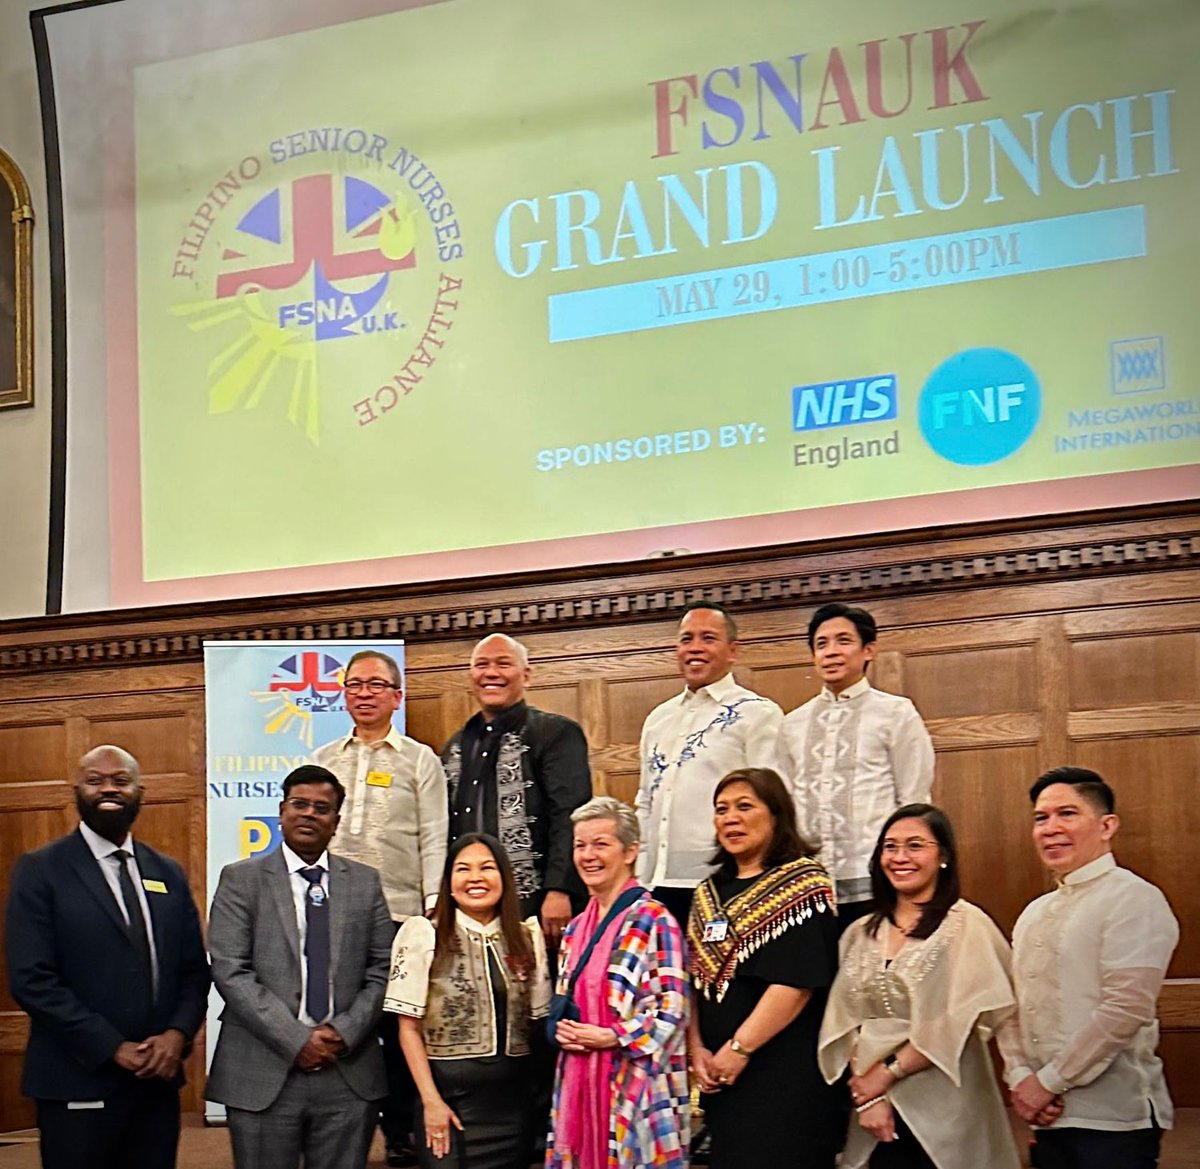 Again,thank you to @Crouchendtiger7 for gracing our grand launch yesterday and knowing that this is your last speaking engagement before you step down as NMC Chief Exec made it all special. Your support and passion in the nursing community is very much appreciated. @FSNA_UK